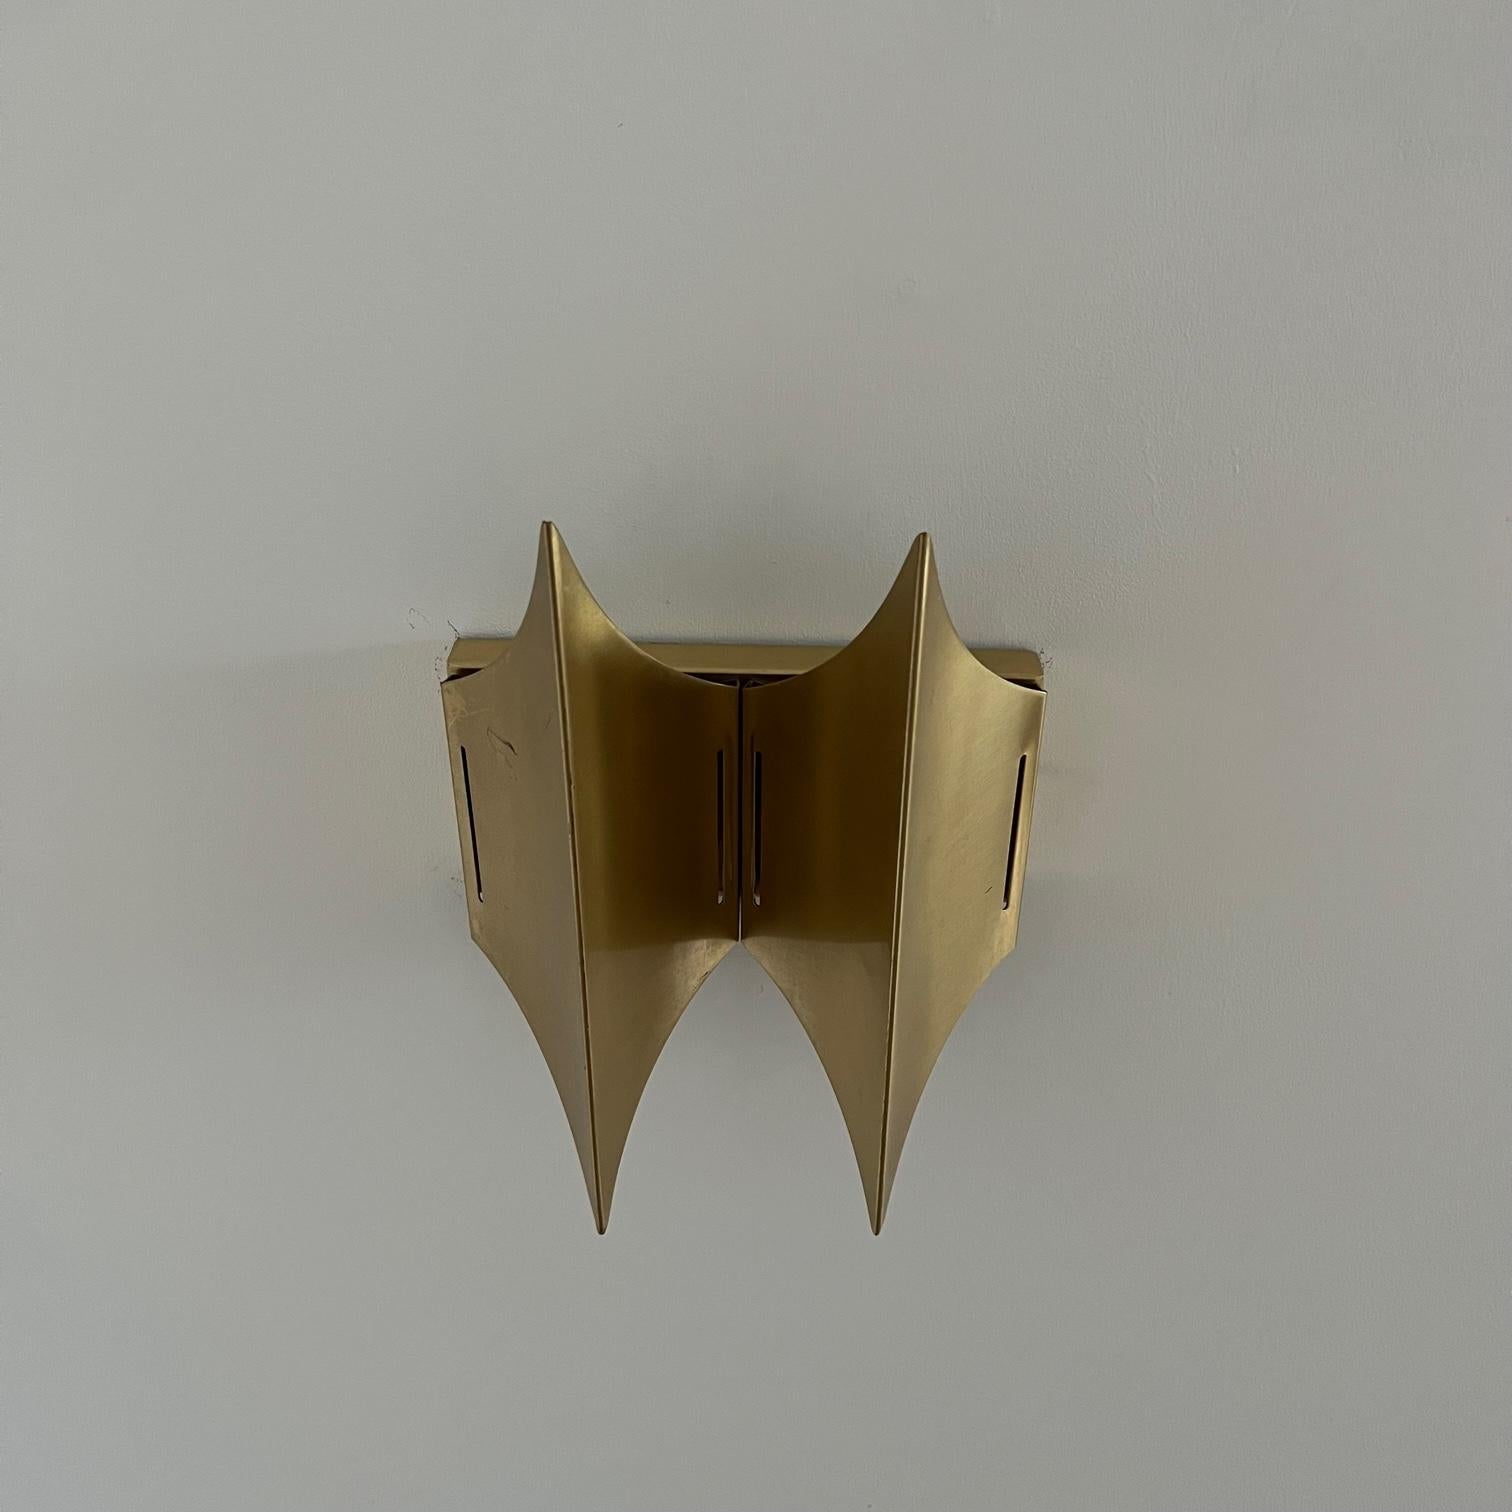 Danish Mid-Century Brass Gothic Wall Lights by Bent Karlby '2 Pieces Available' For Sale